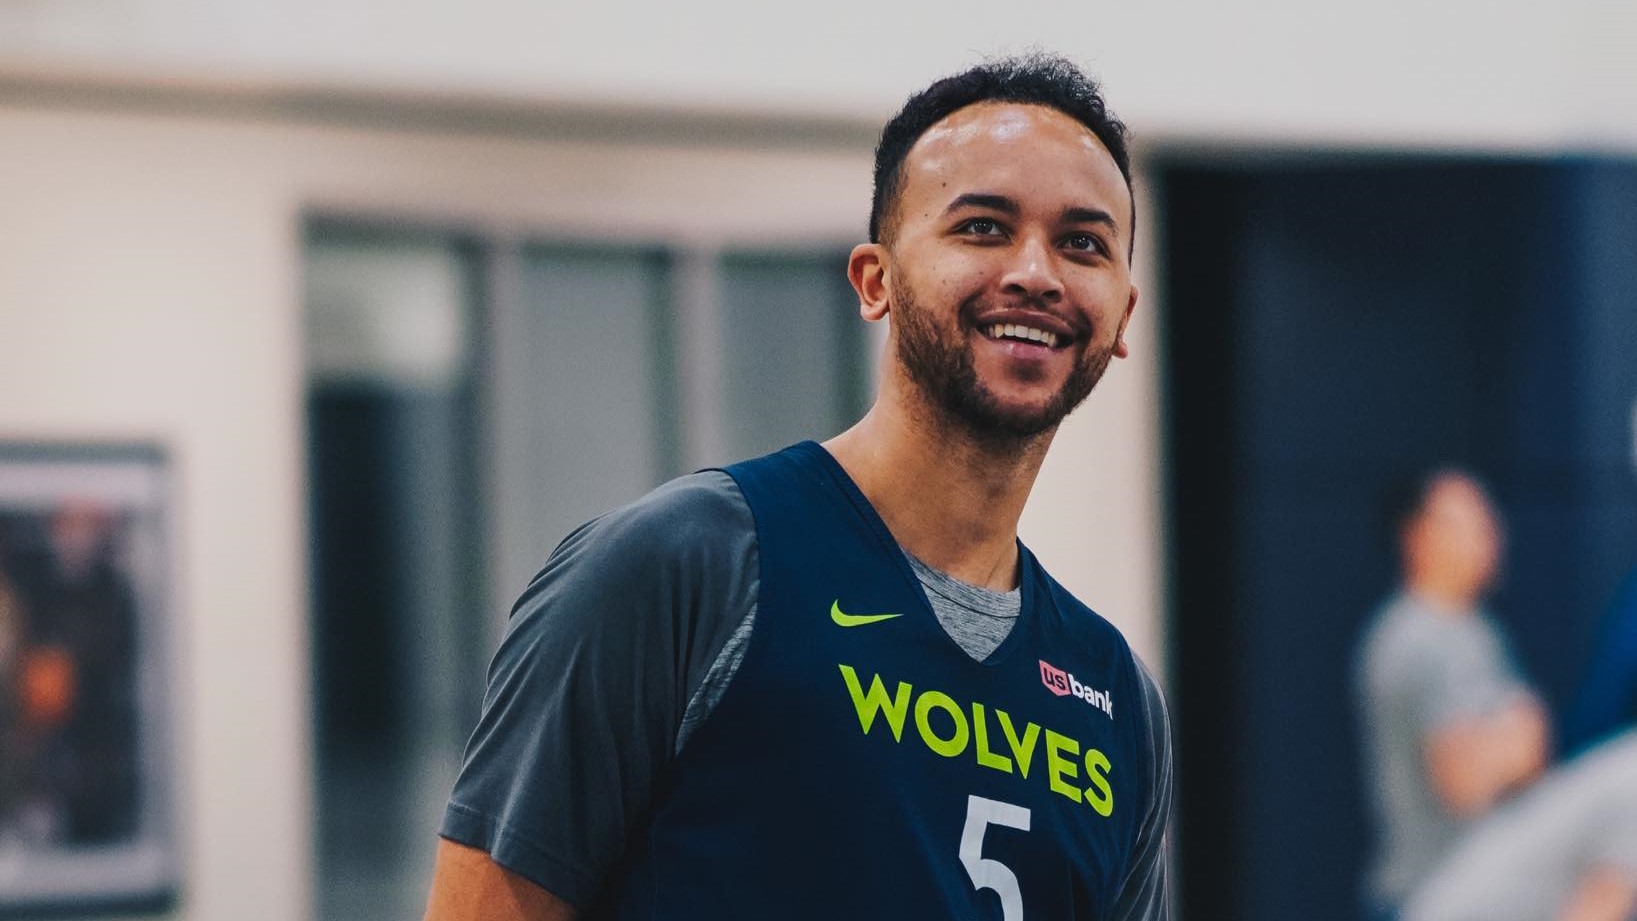 Li Kaier is here: Timberwolves' Kyle Anderson makes debut for 